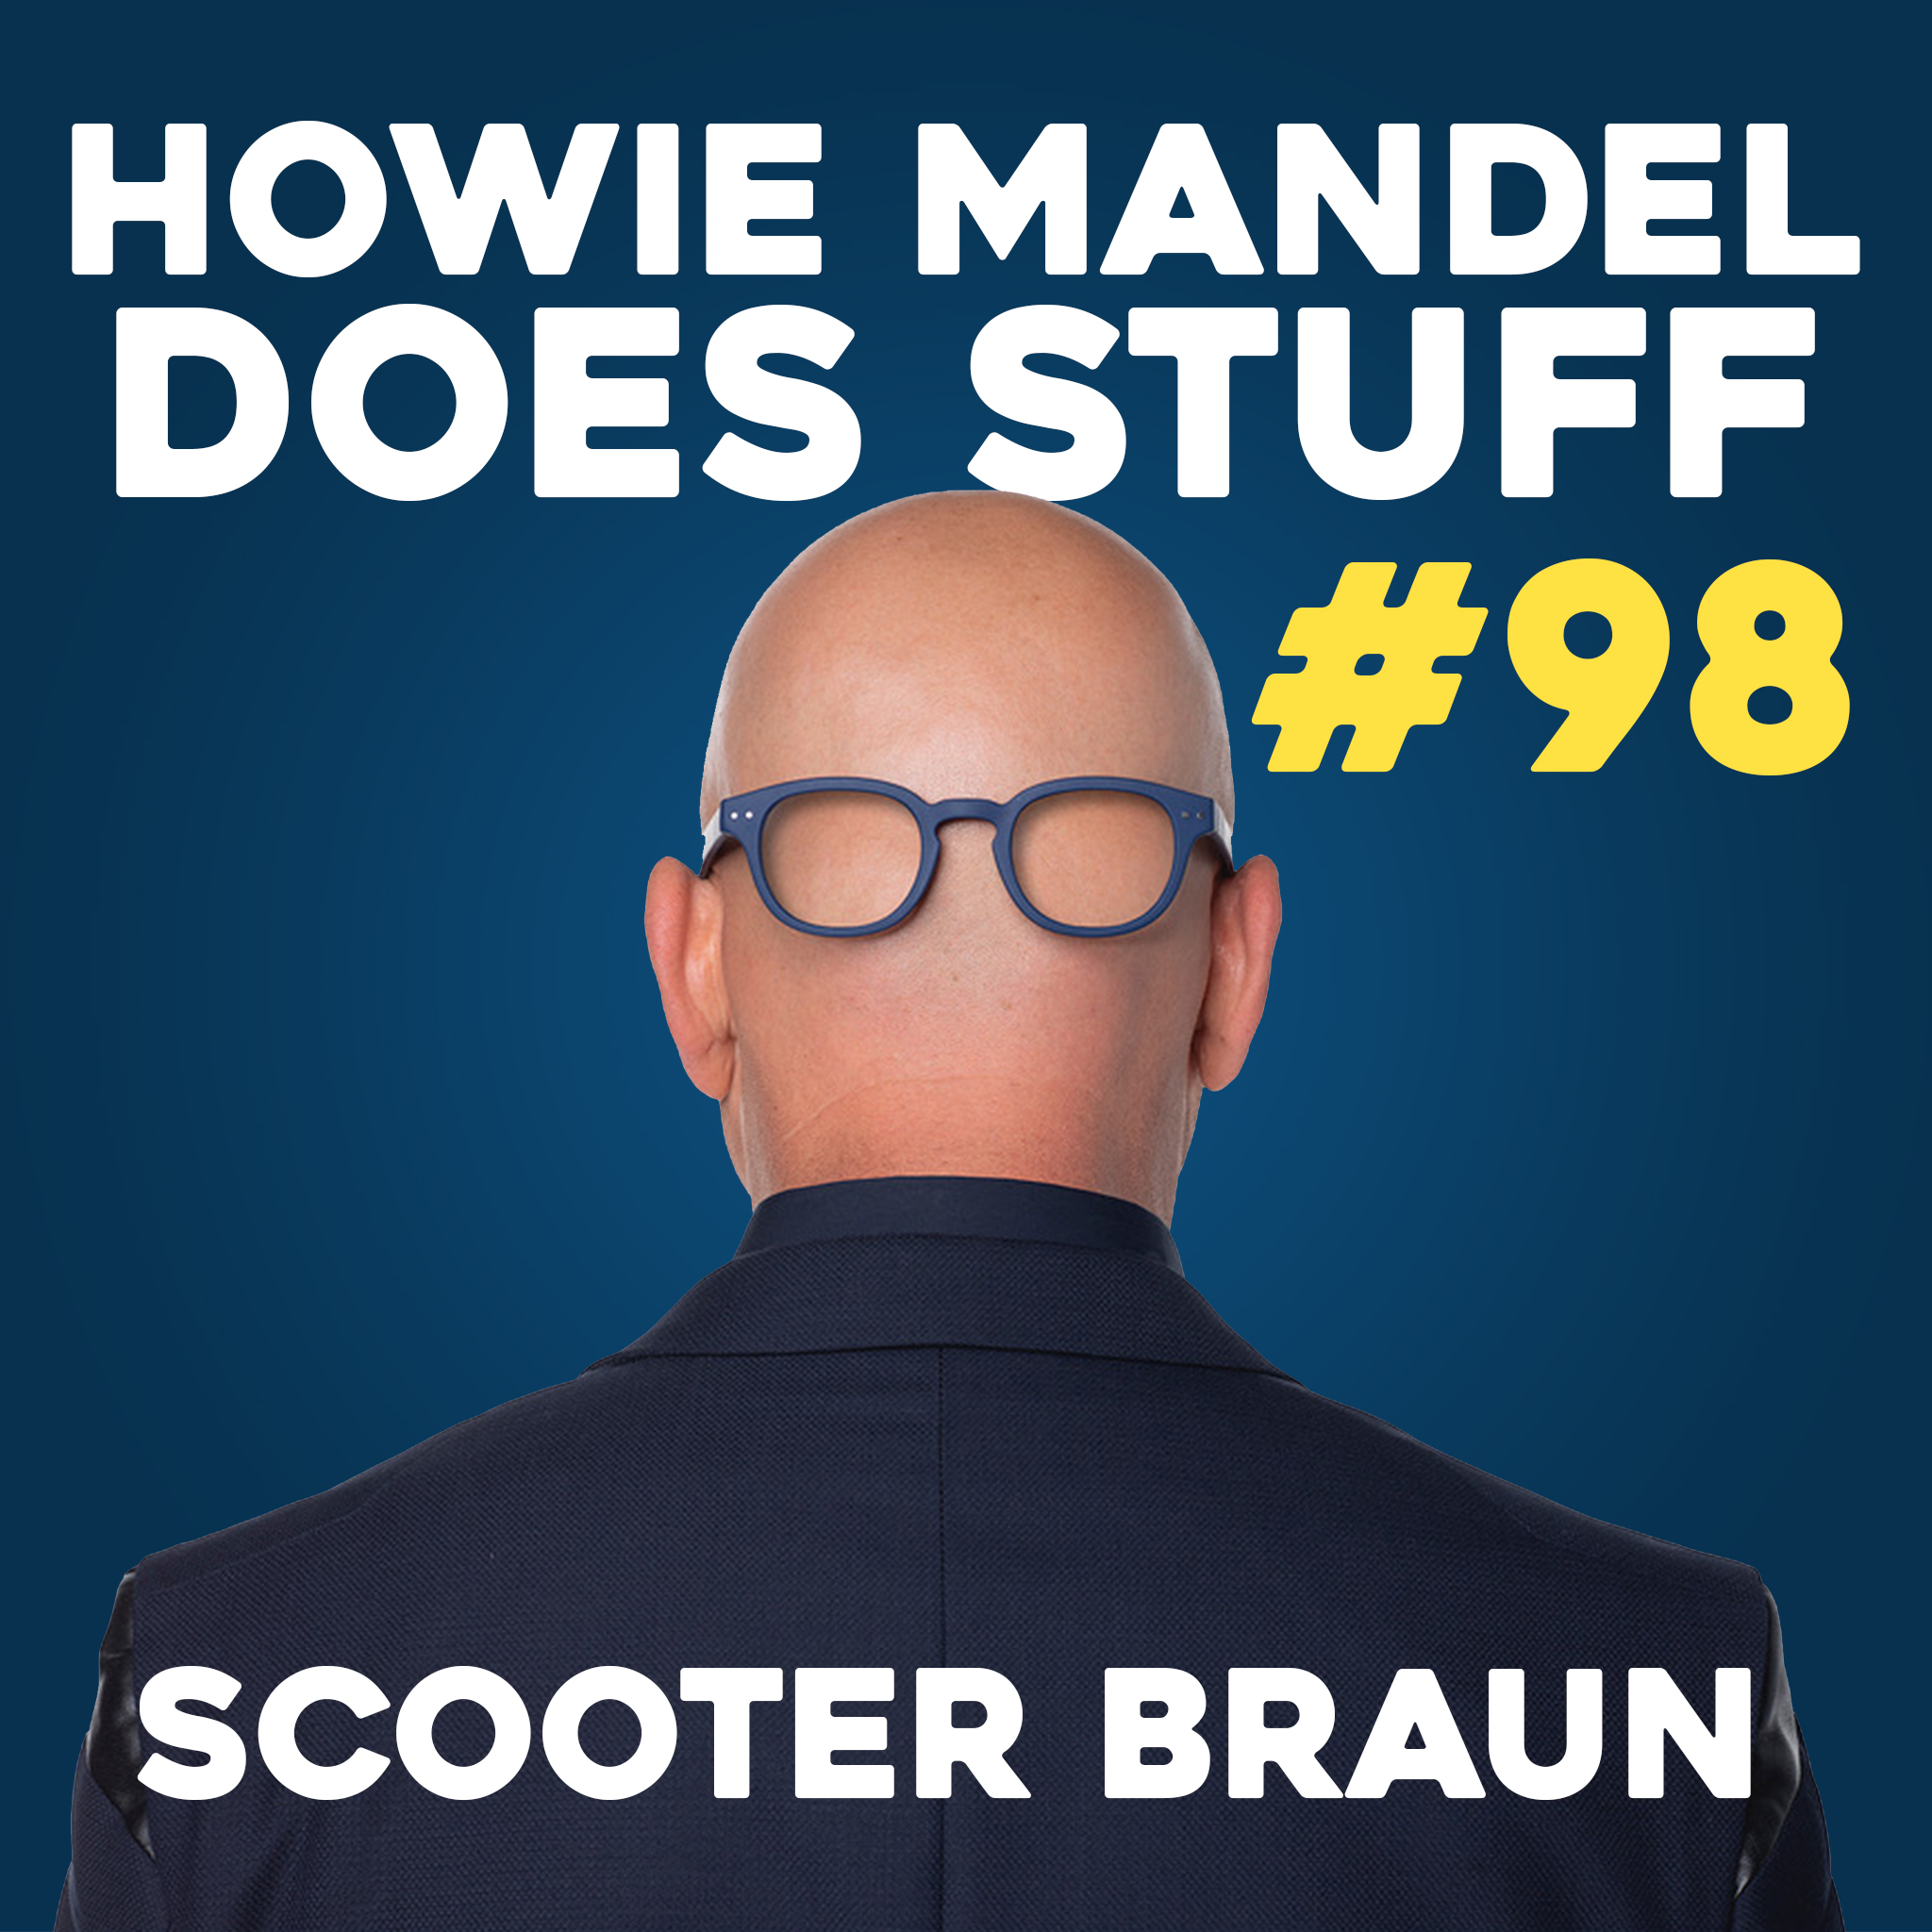 How Scooter Braun Caused Ariana Grande to Kill Tom Hanks | Howie Mandel Does Stuff #98